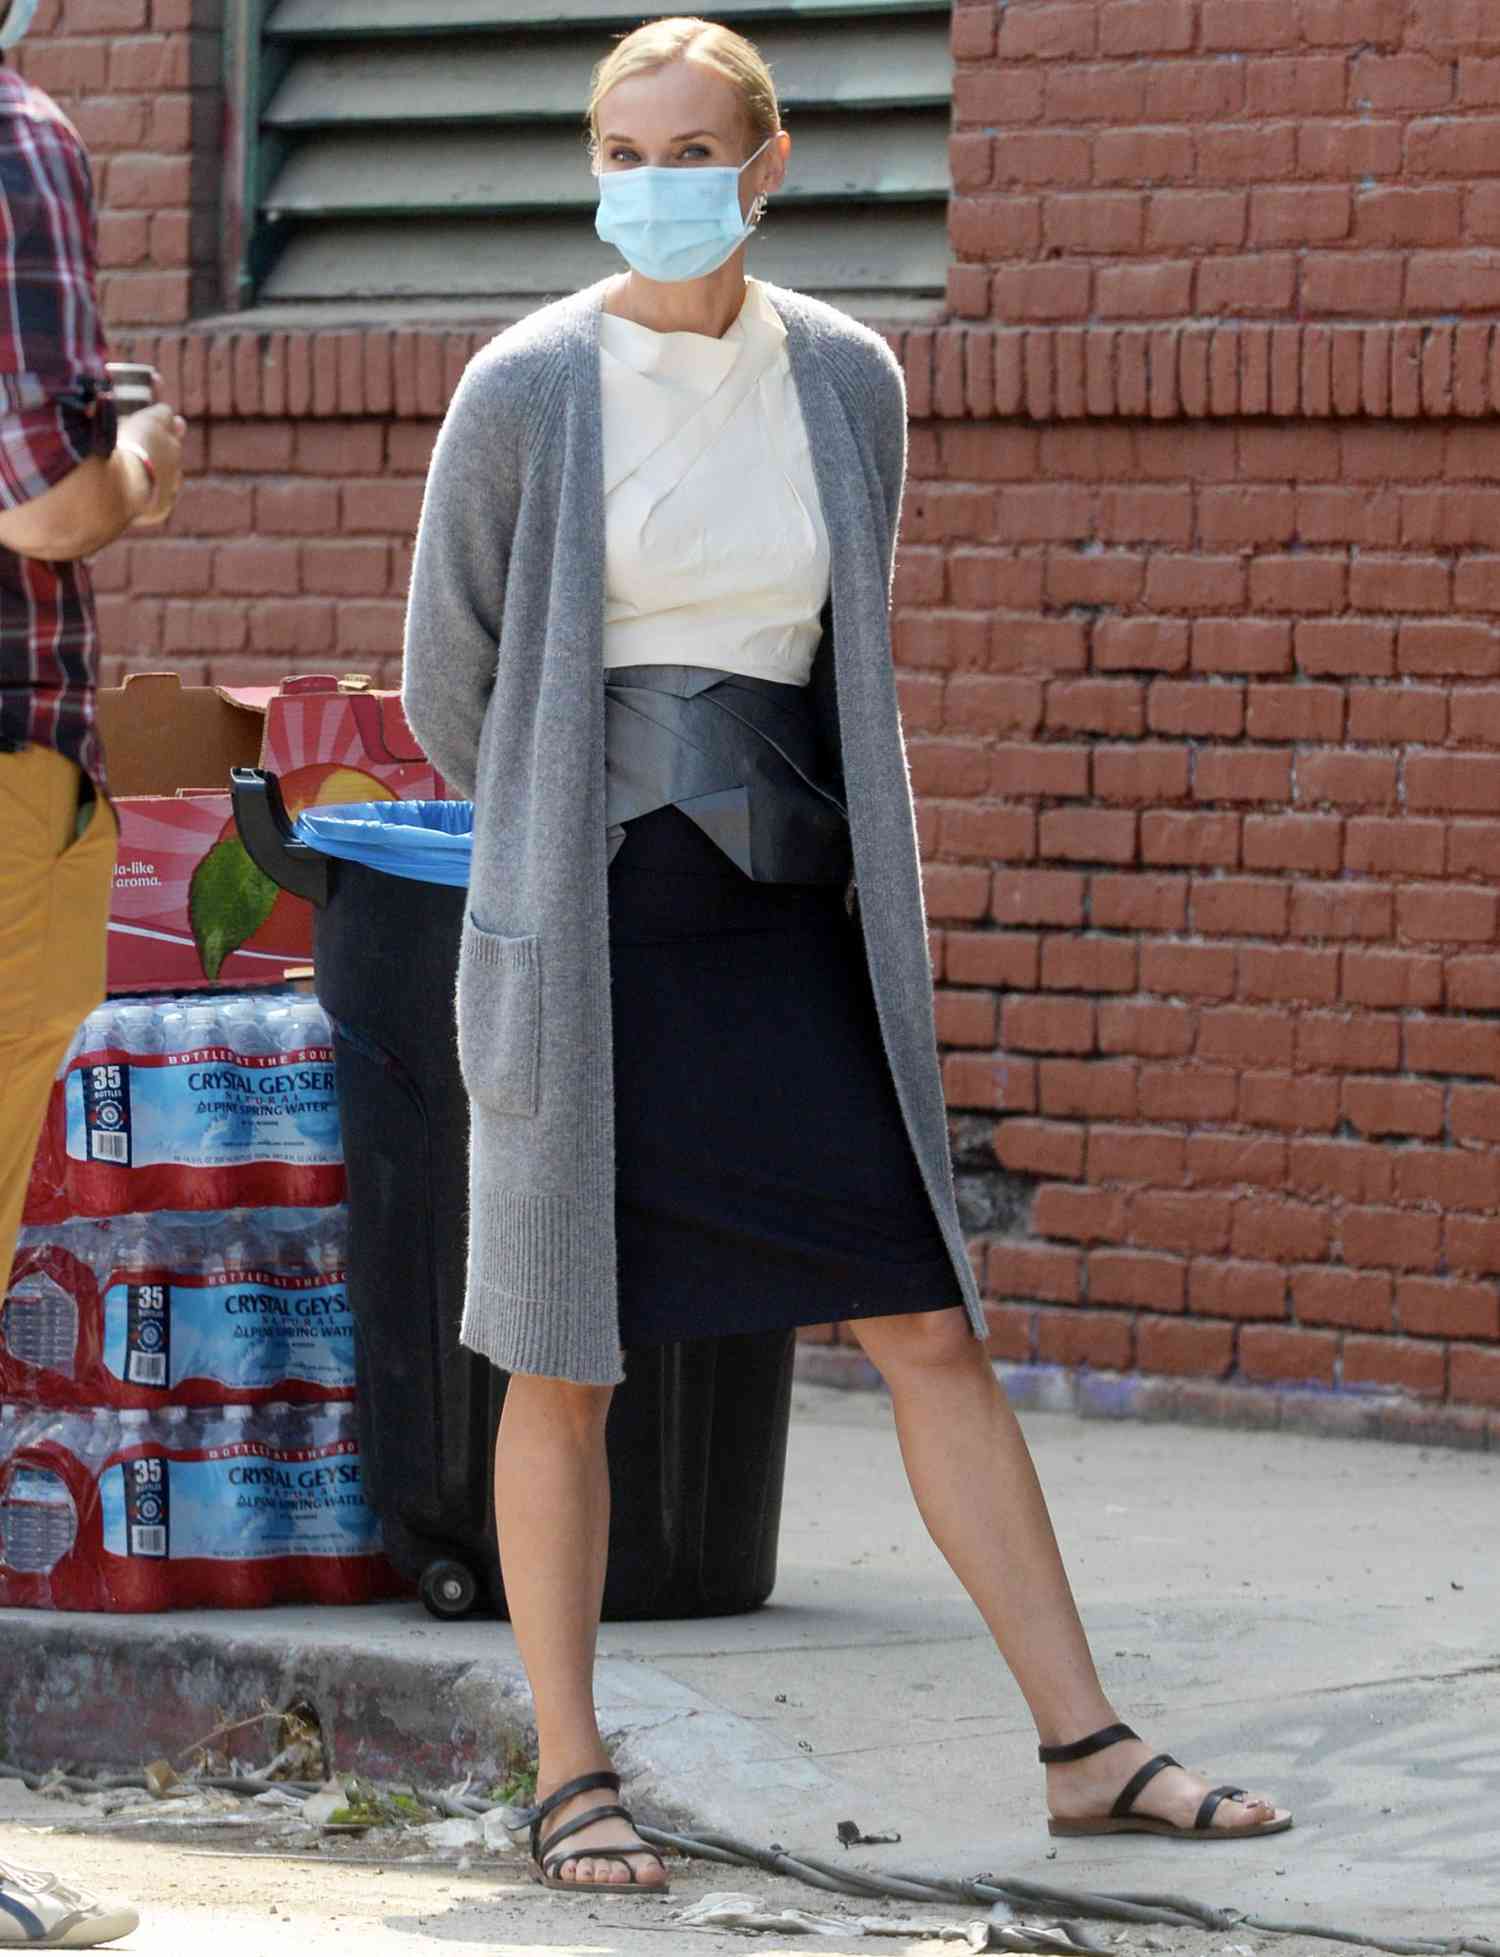 Diane Kruger is Spotted on the Set of "Swimming With Sharks" in Los Angeles.